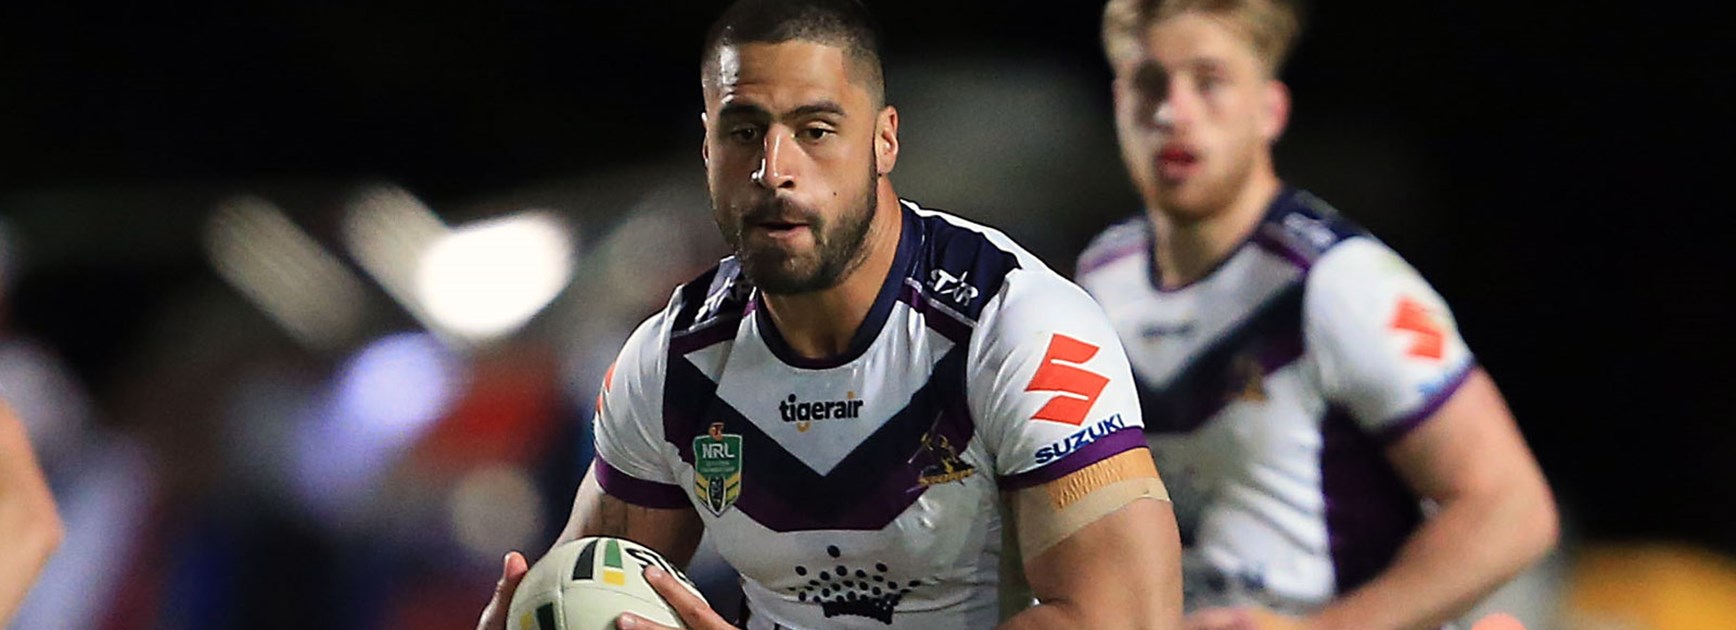 Storm prop Jesse Bromwich is bracing for a physical battle with the Sharks in Round 26.